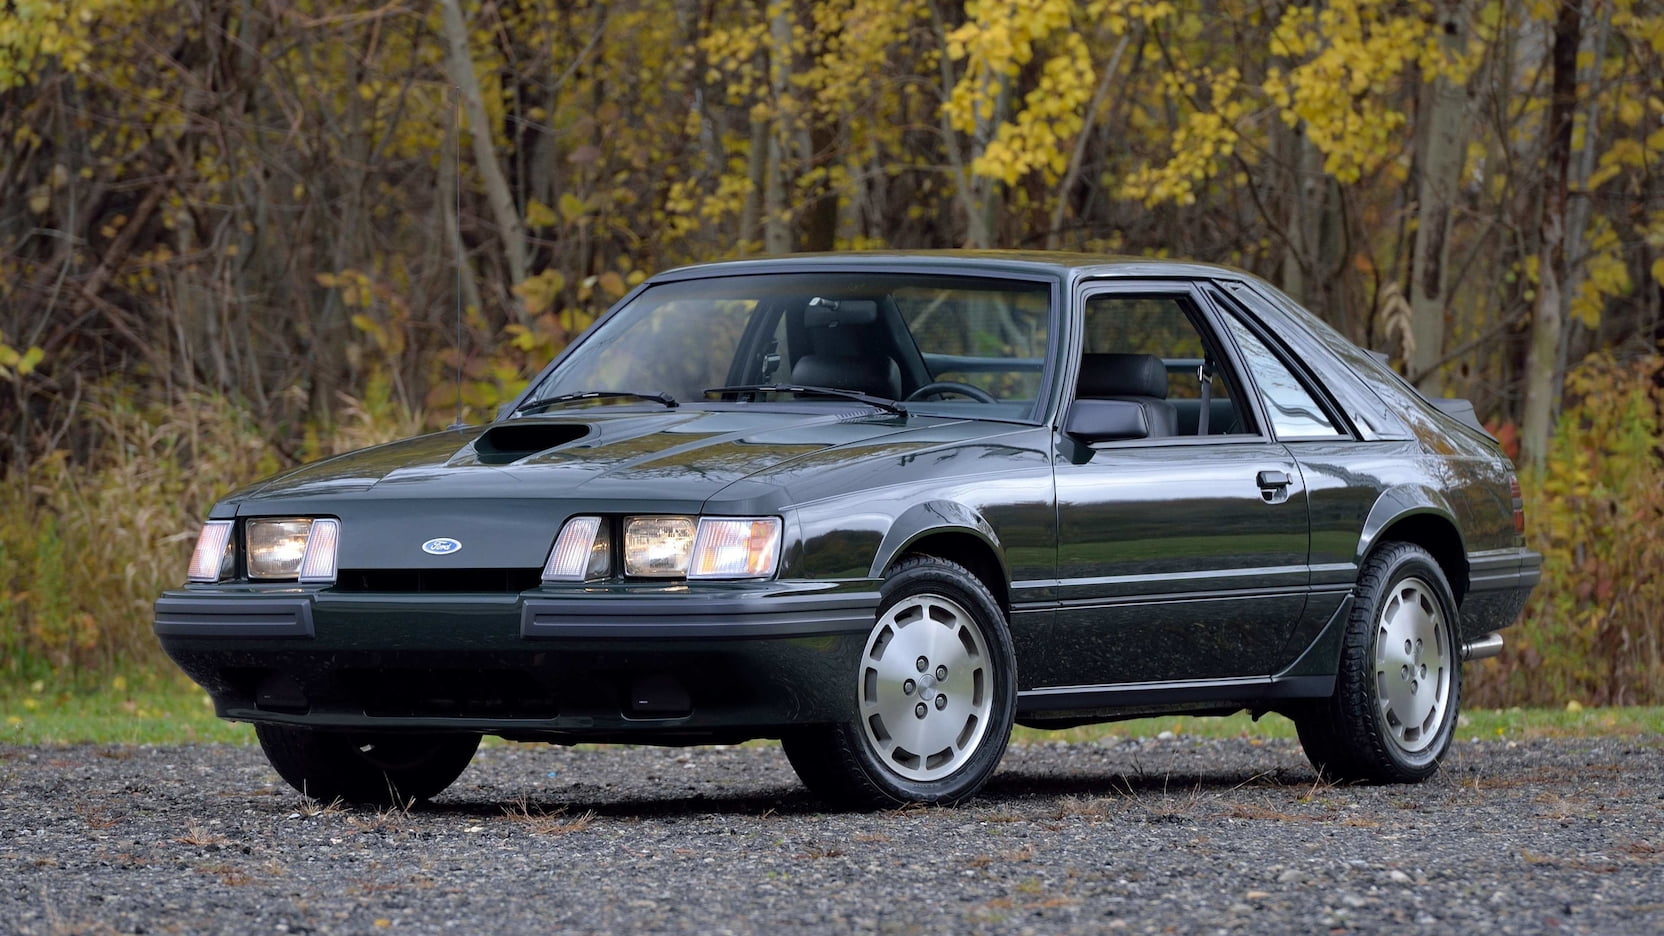 Mustang Of The Day: 1985 Ford Mustang SVO